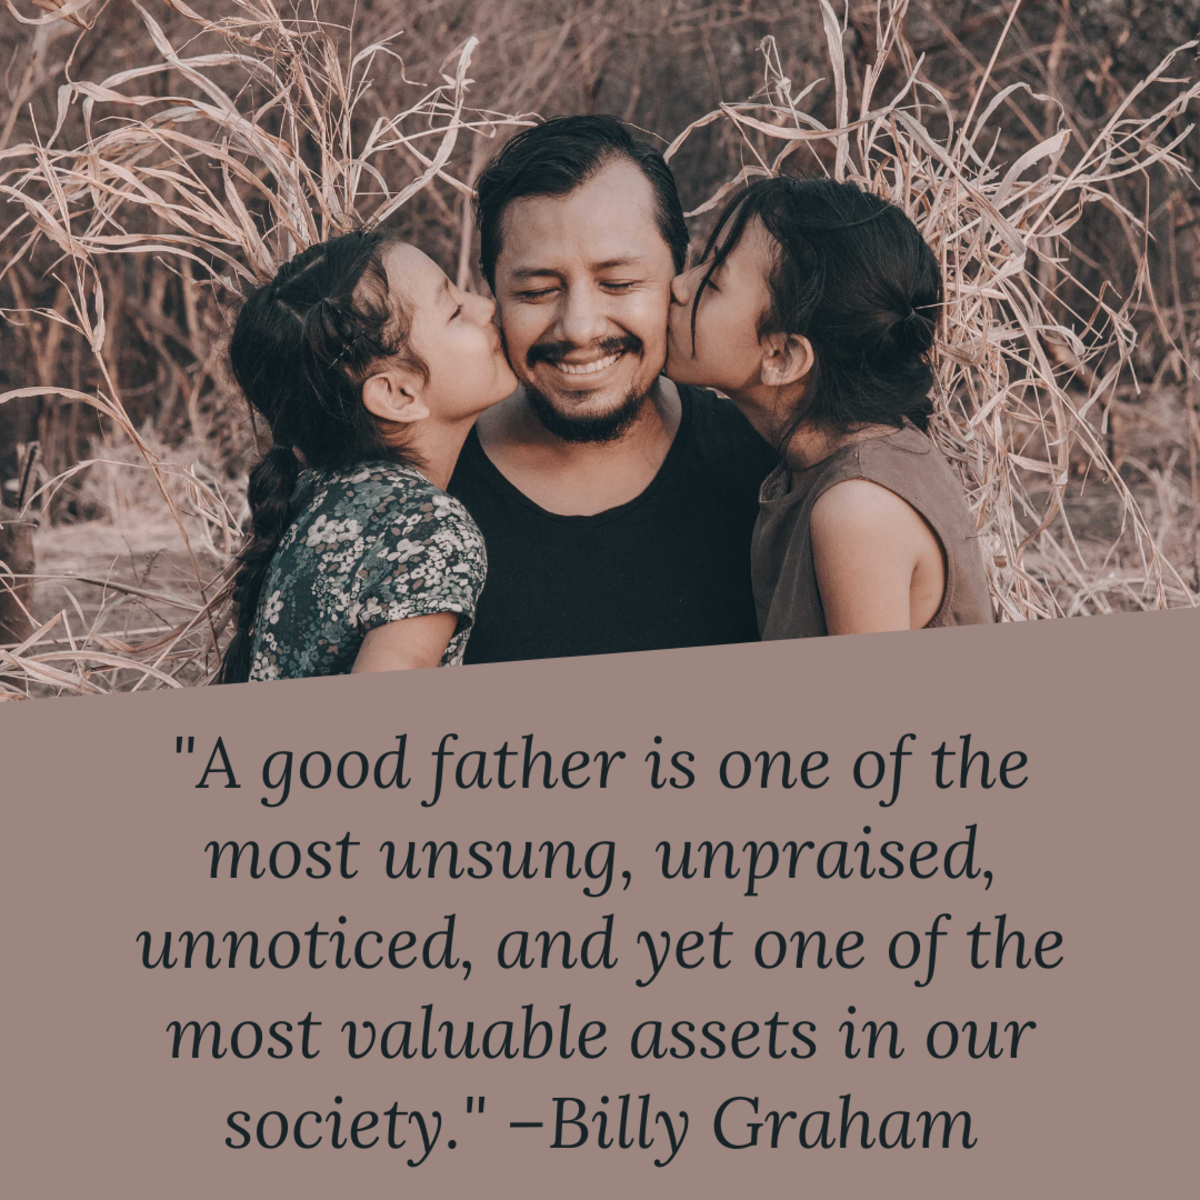 Sometimes, Father's Day calls for a great quote or saying.